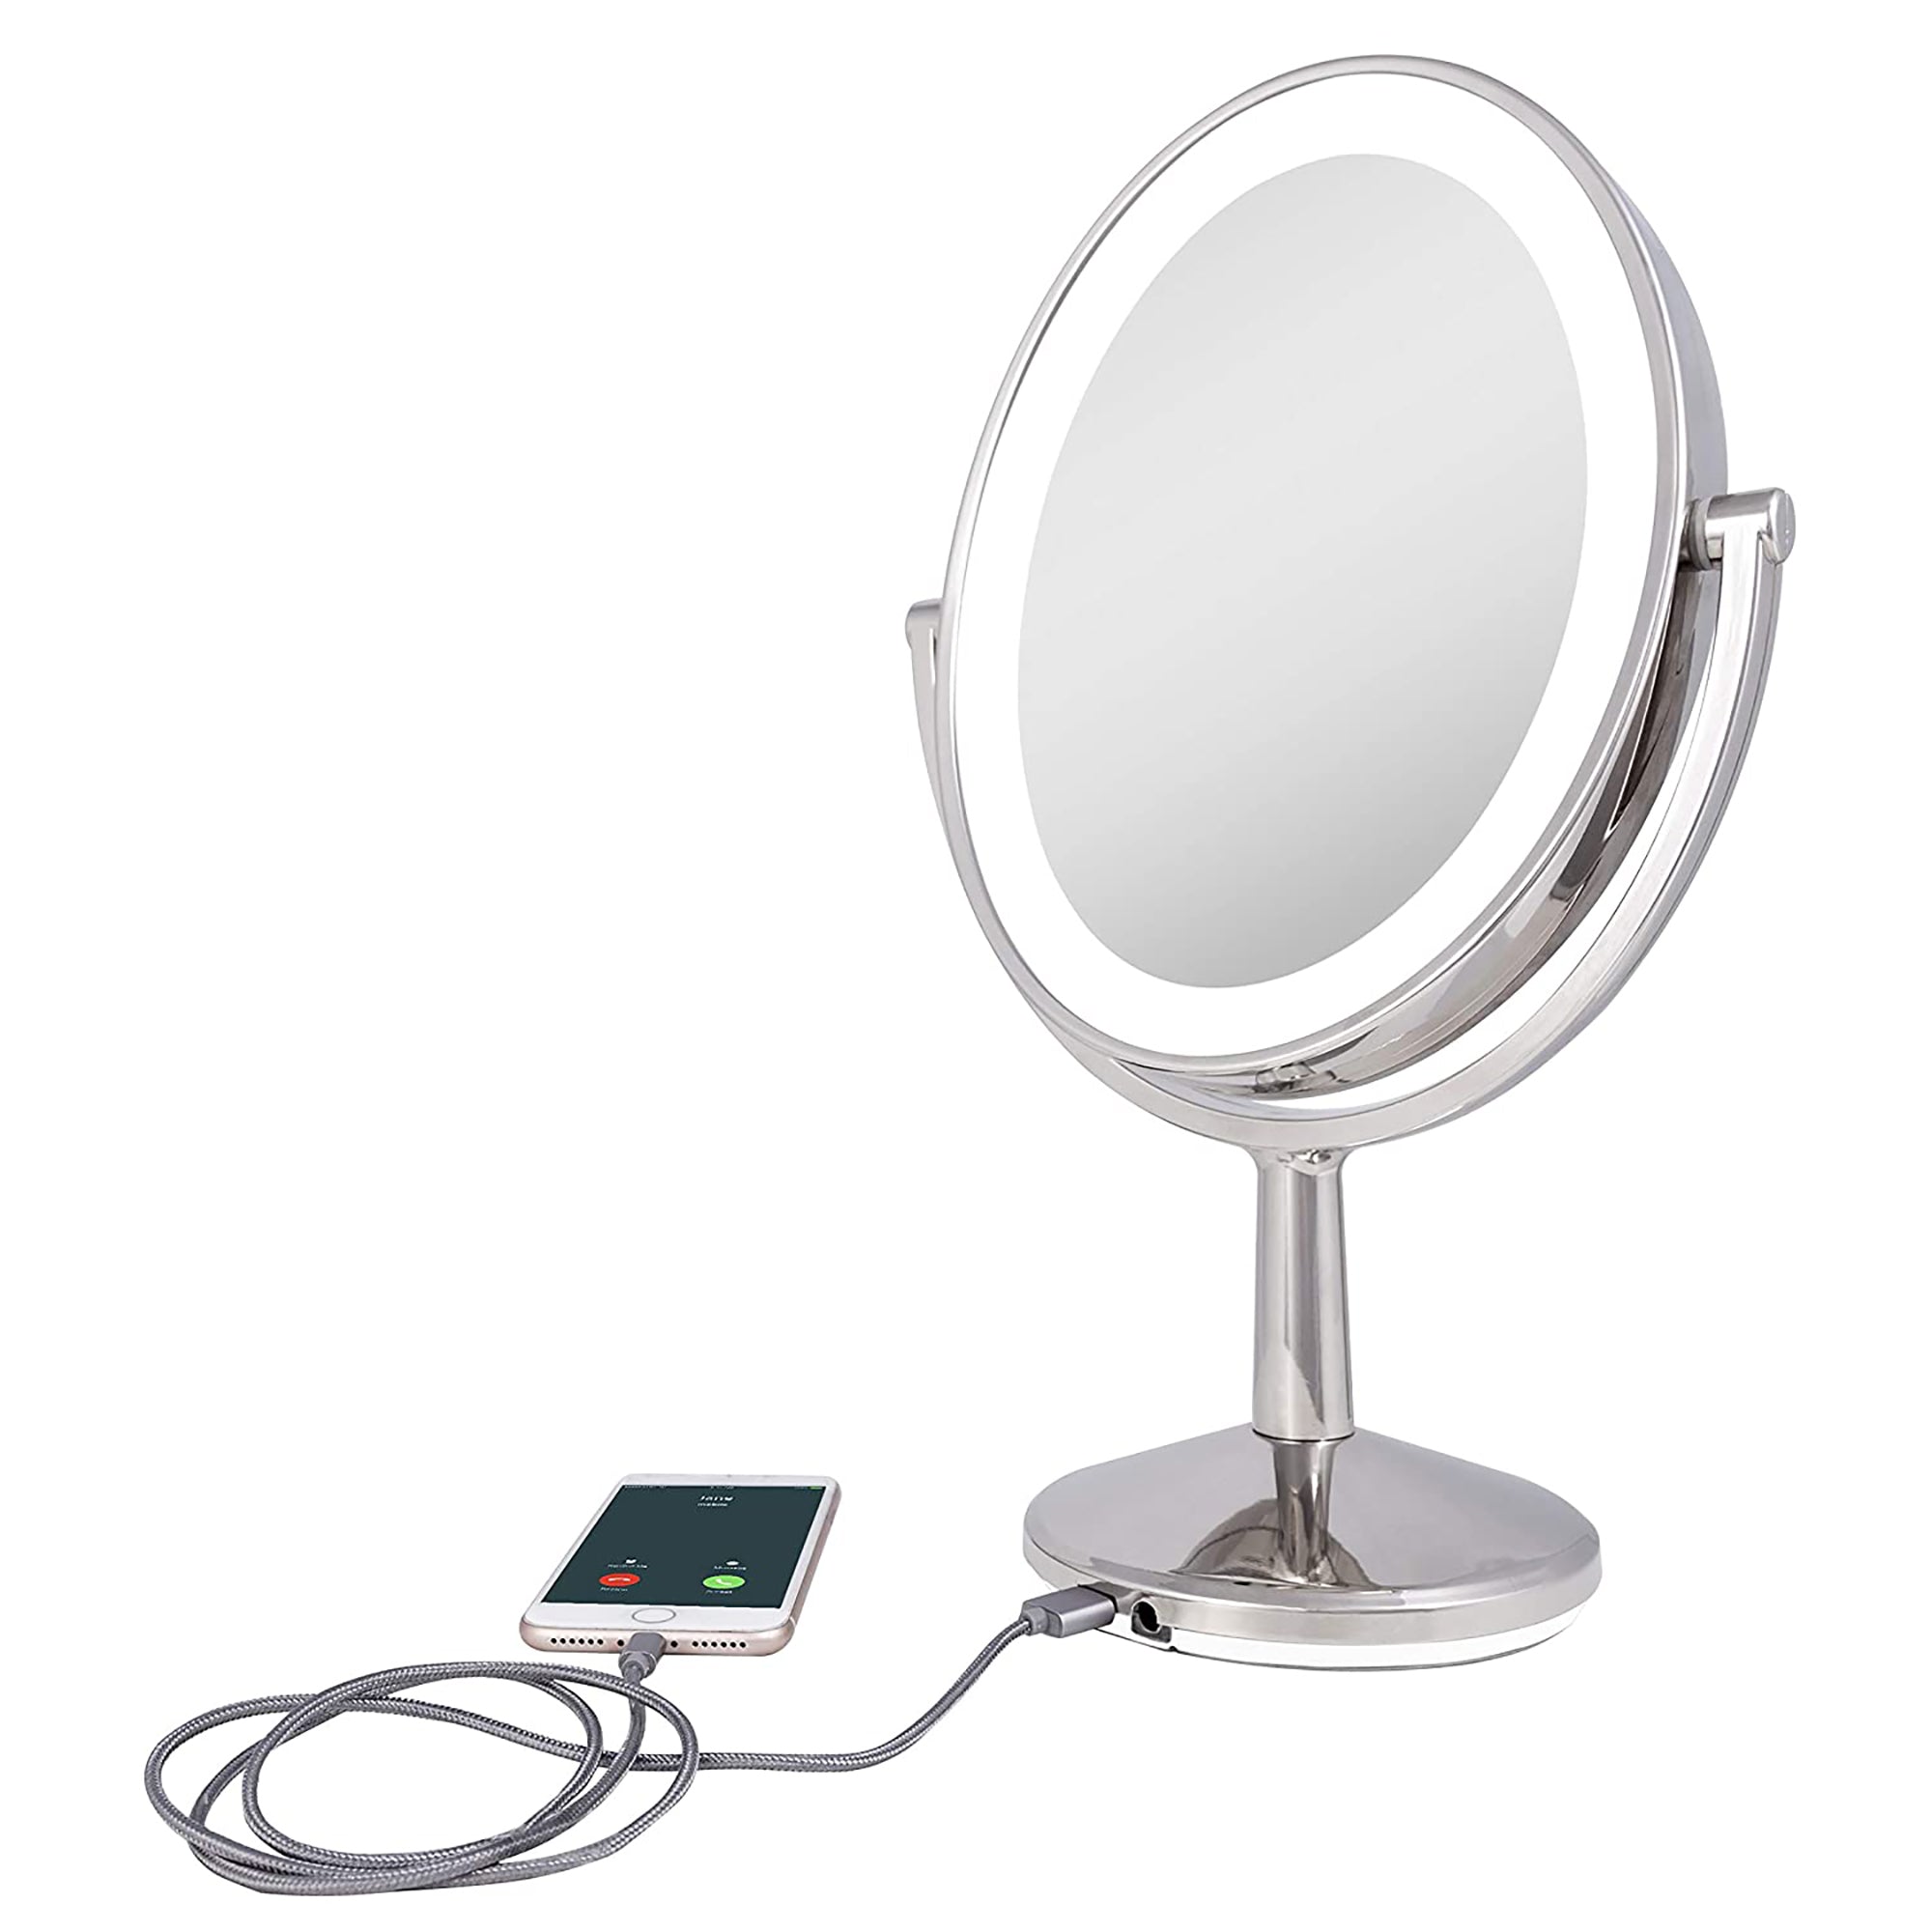 Zadro Huntington LED Lighted Rechargeable Vanity Mirror, Oval Double Sided 5X/1X Magnification, Polished Nickel